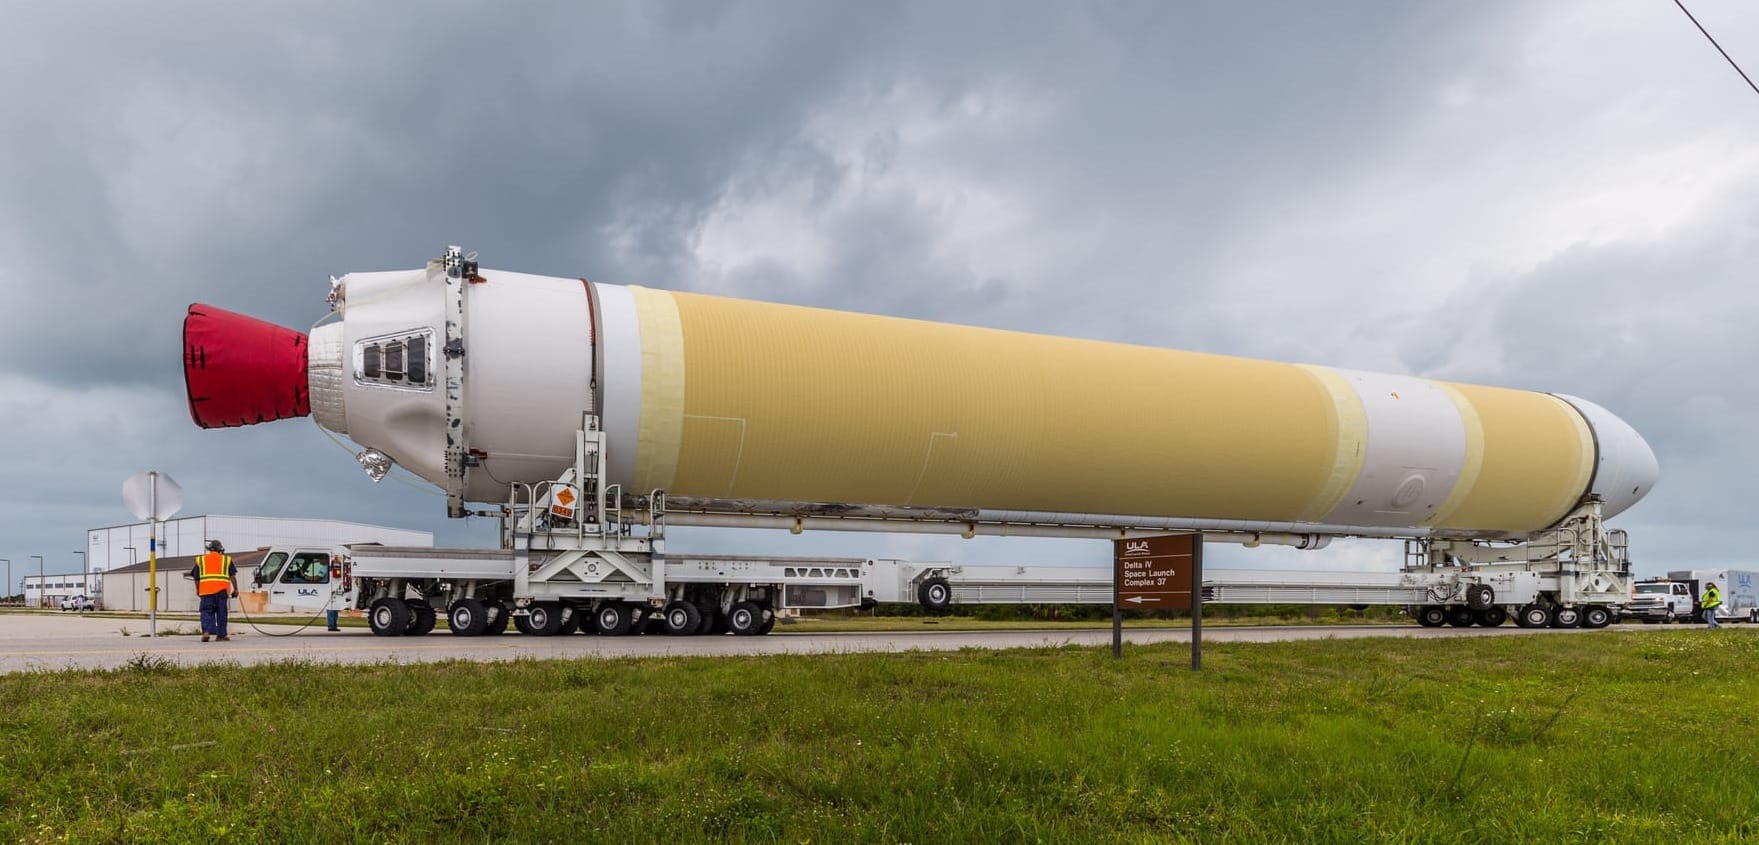 One of the Delta IV Heavy's side Common Booster Cores being transported. ©United Launch Alliance 